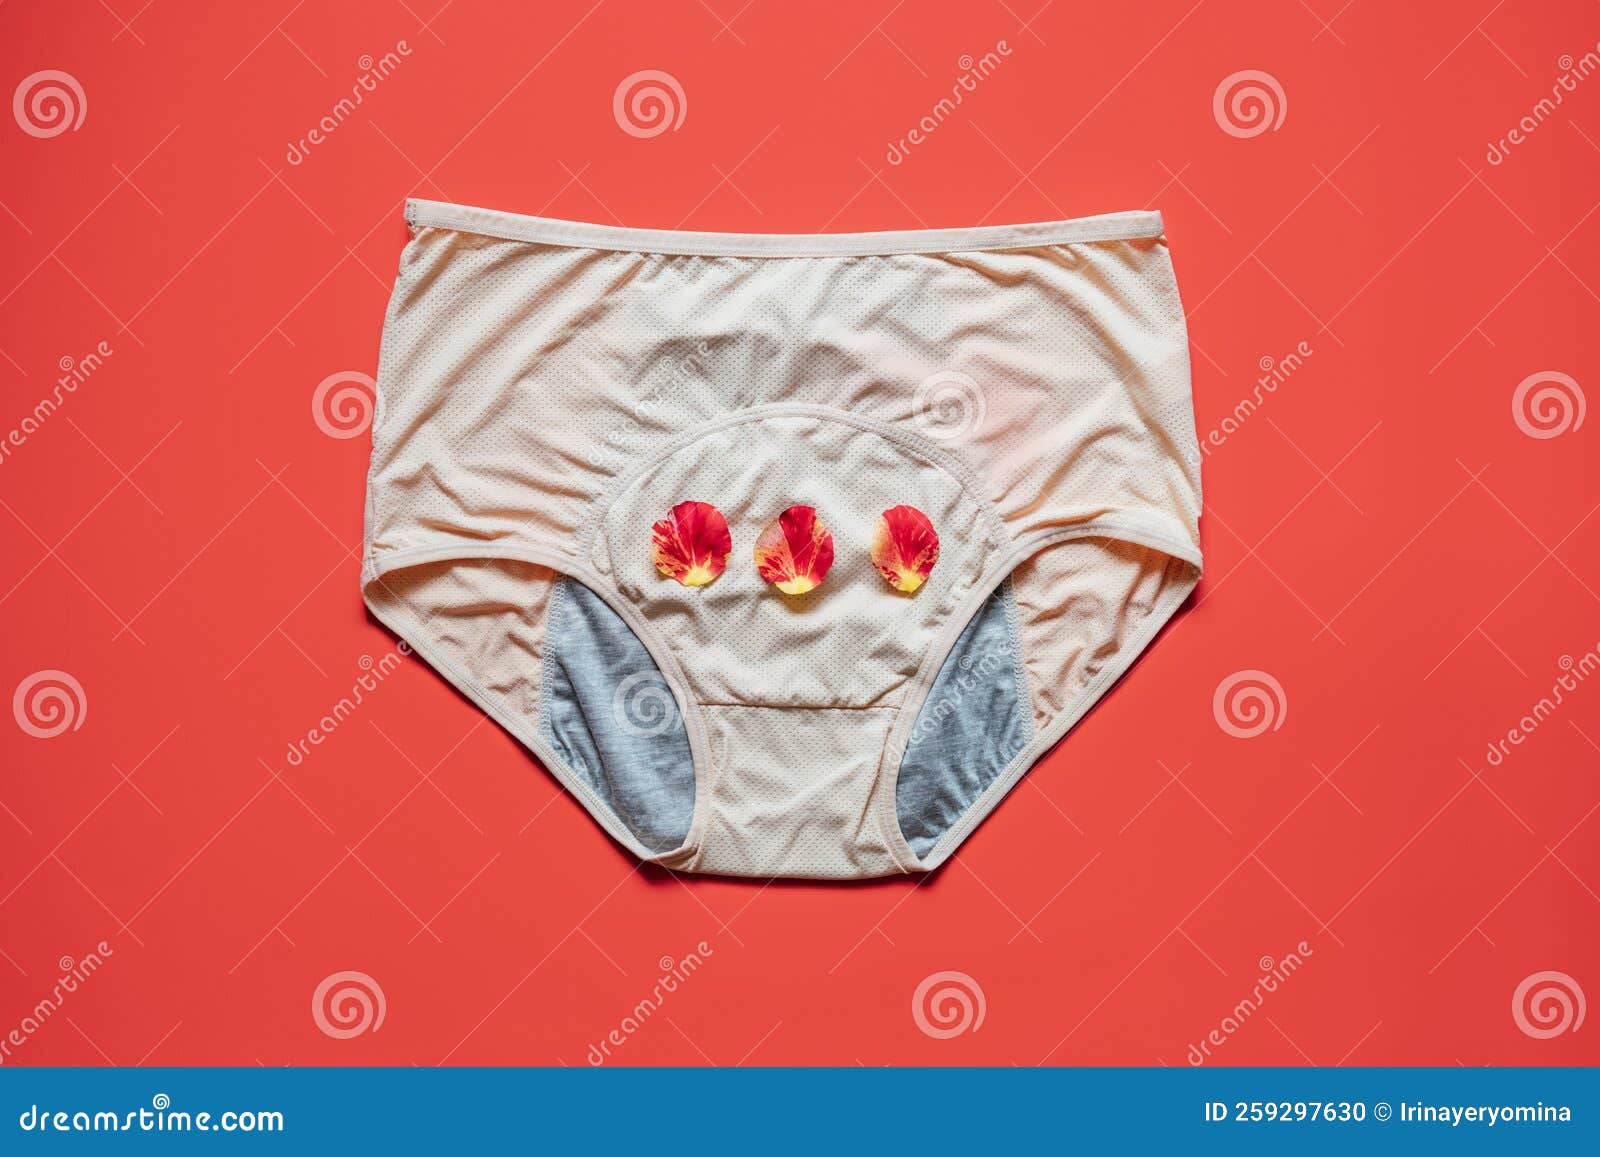 Reusable Period Underwear on Red Background. Absorbent and Affordable Period  Panties To Absorb Menstrual Fluid Stock Photo - Image of feminine, blood:  259297630